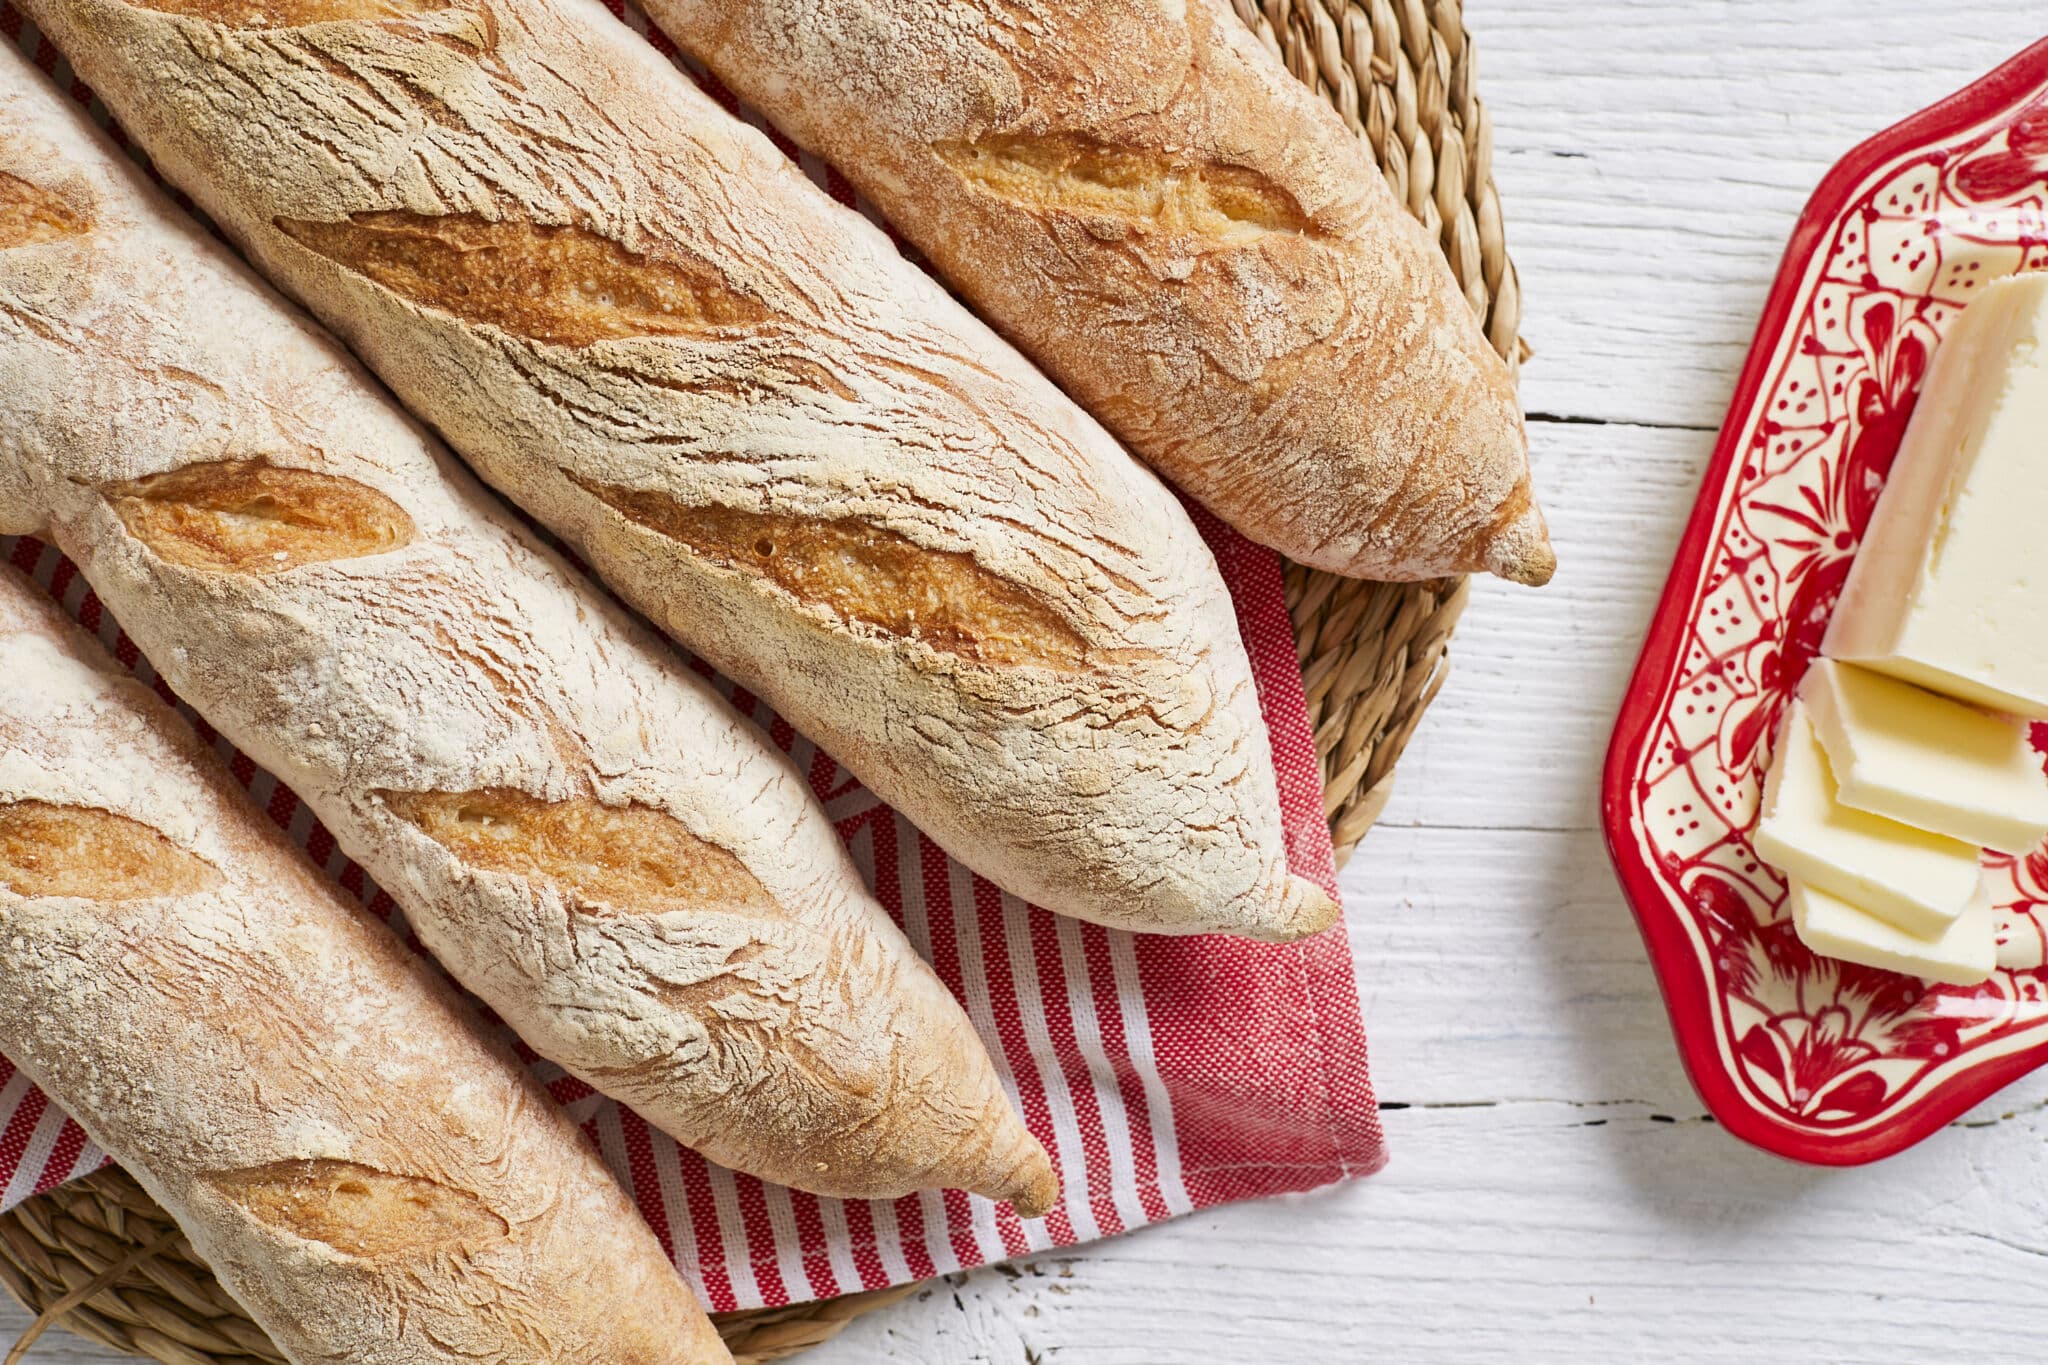 The Best Baguette Baking Tools Home Bakers Need